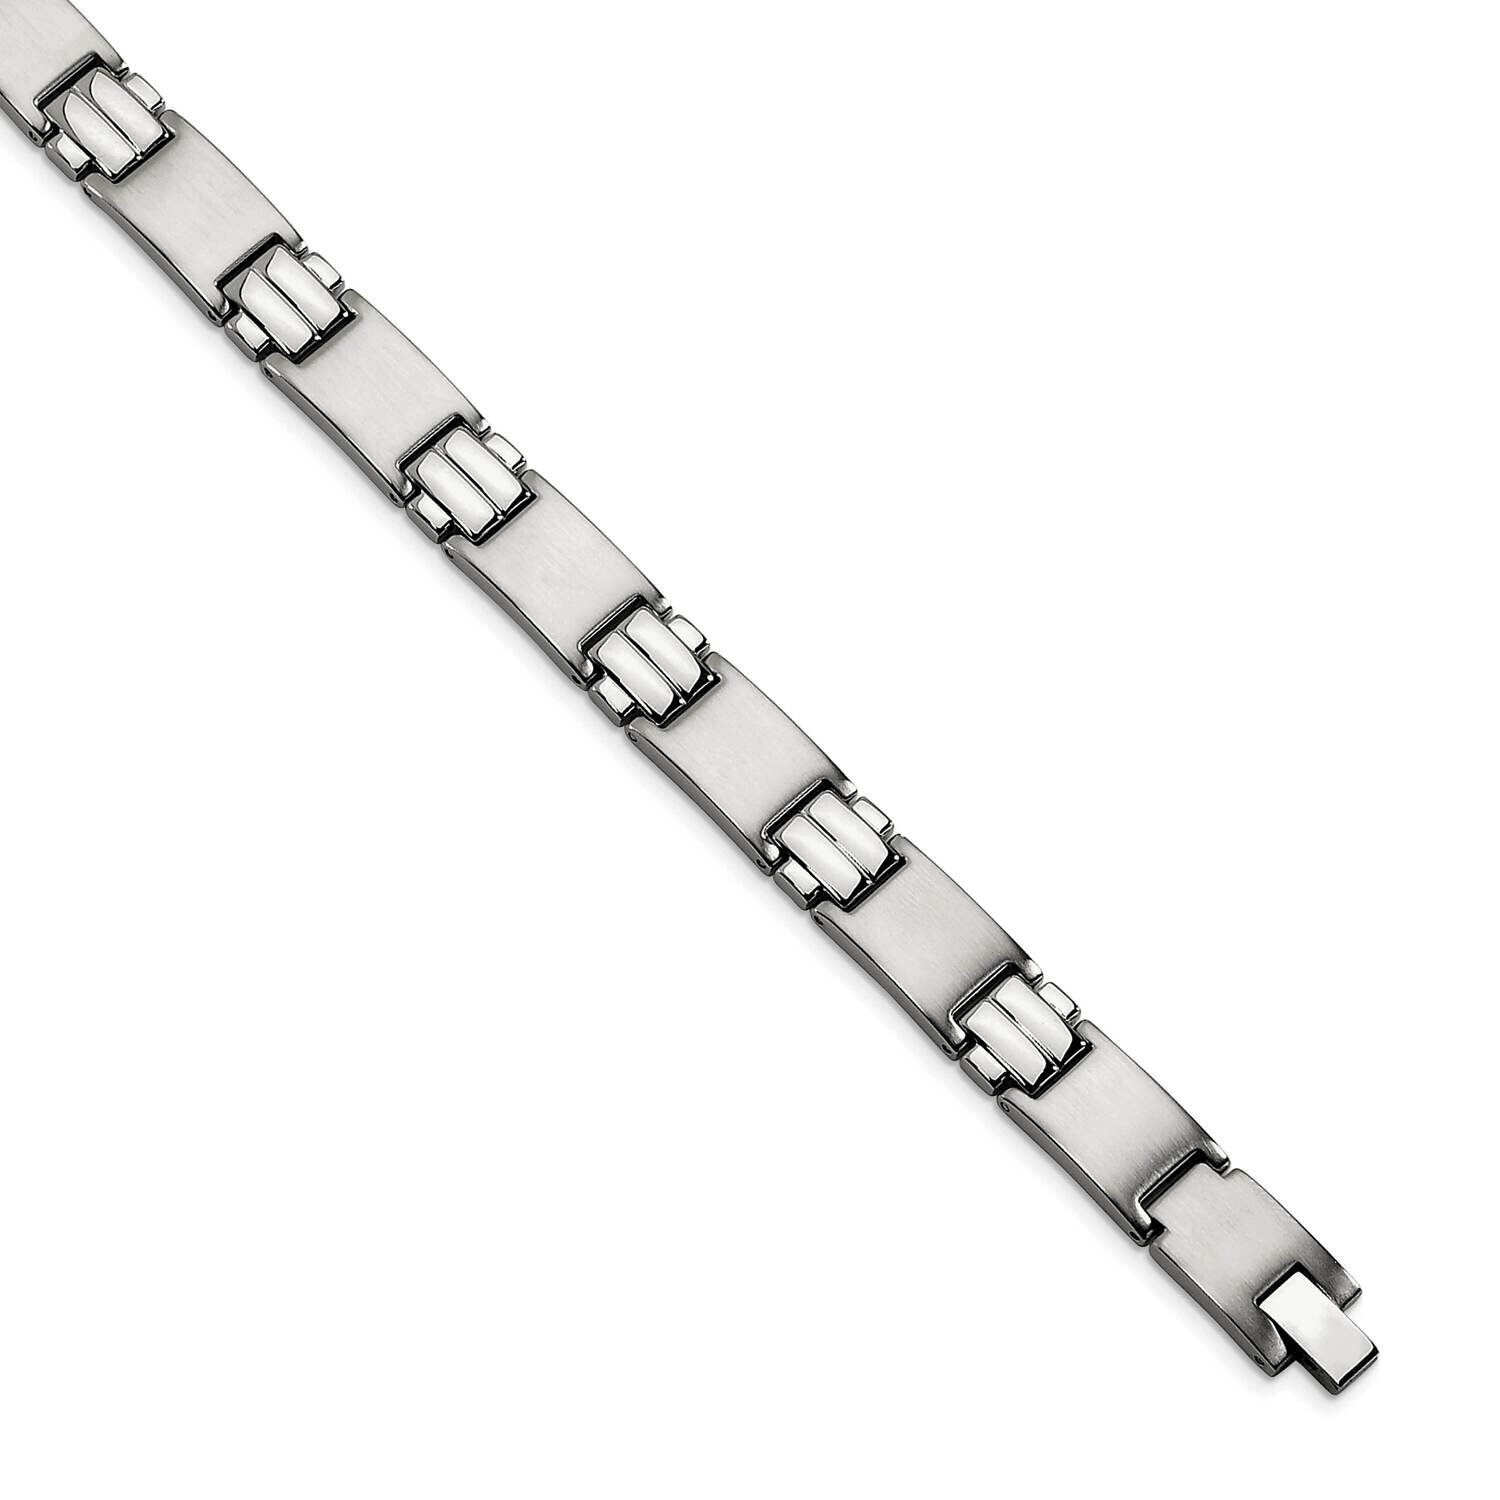 8.5 Inch Bracelet Stainless Steel Brushed and Polished SRB138-8.5